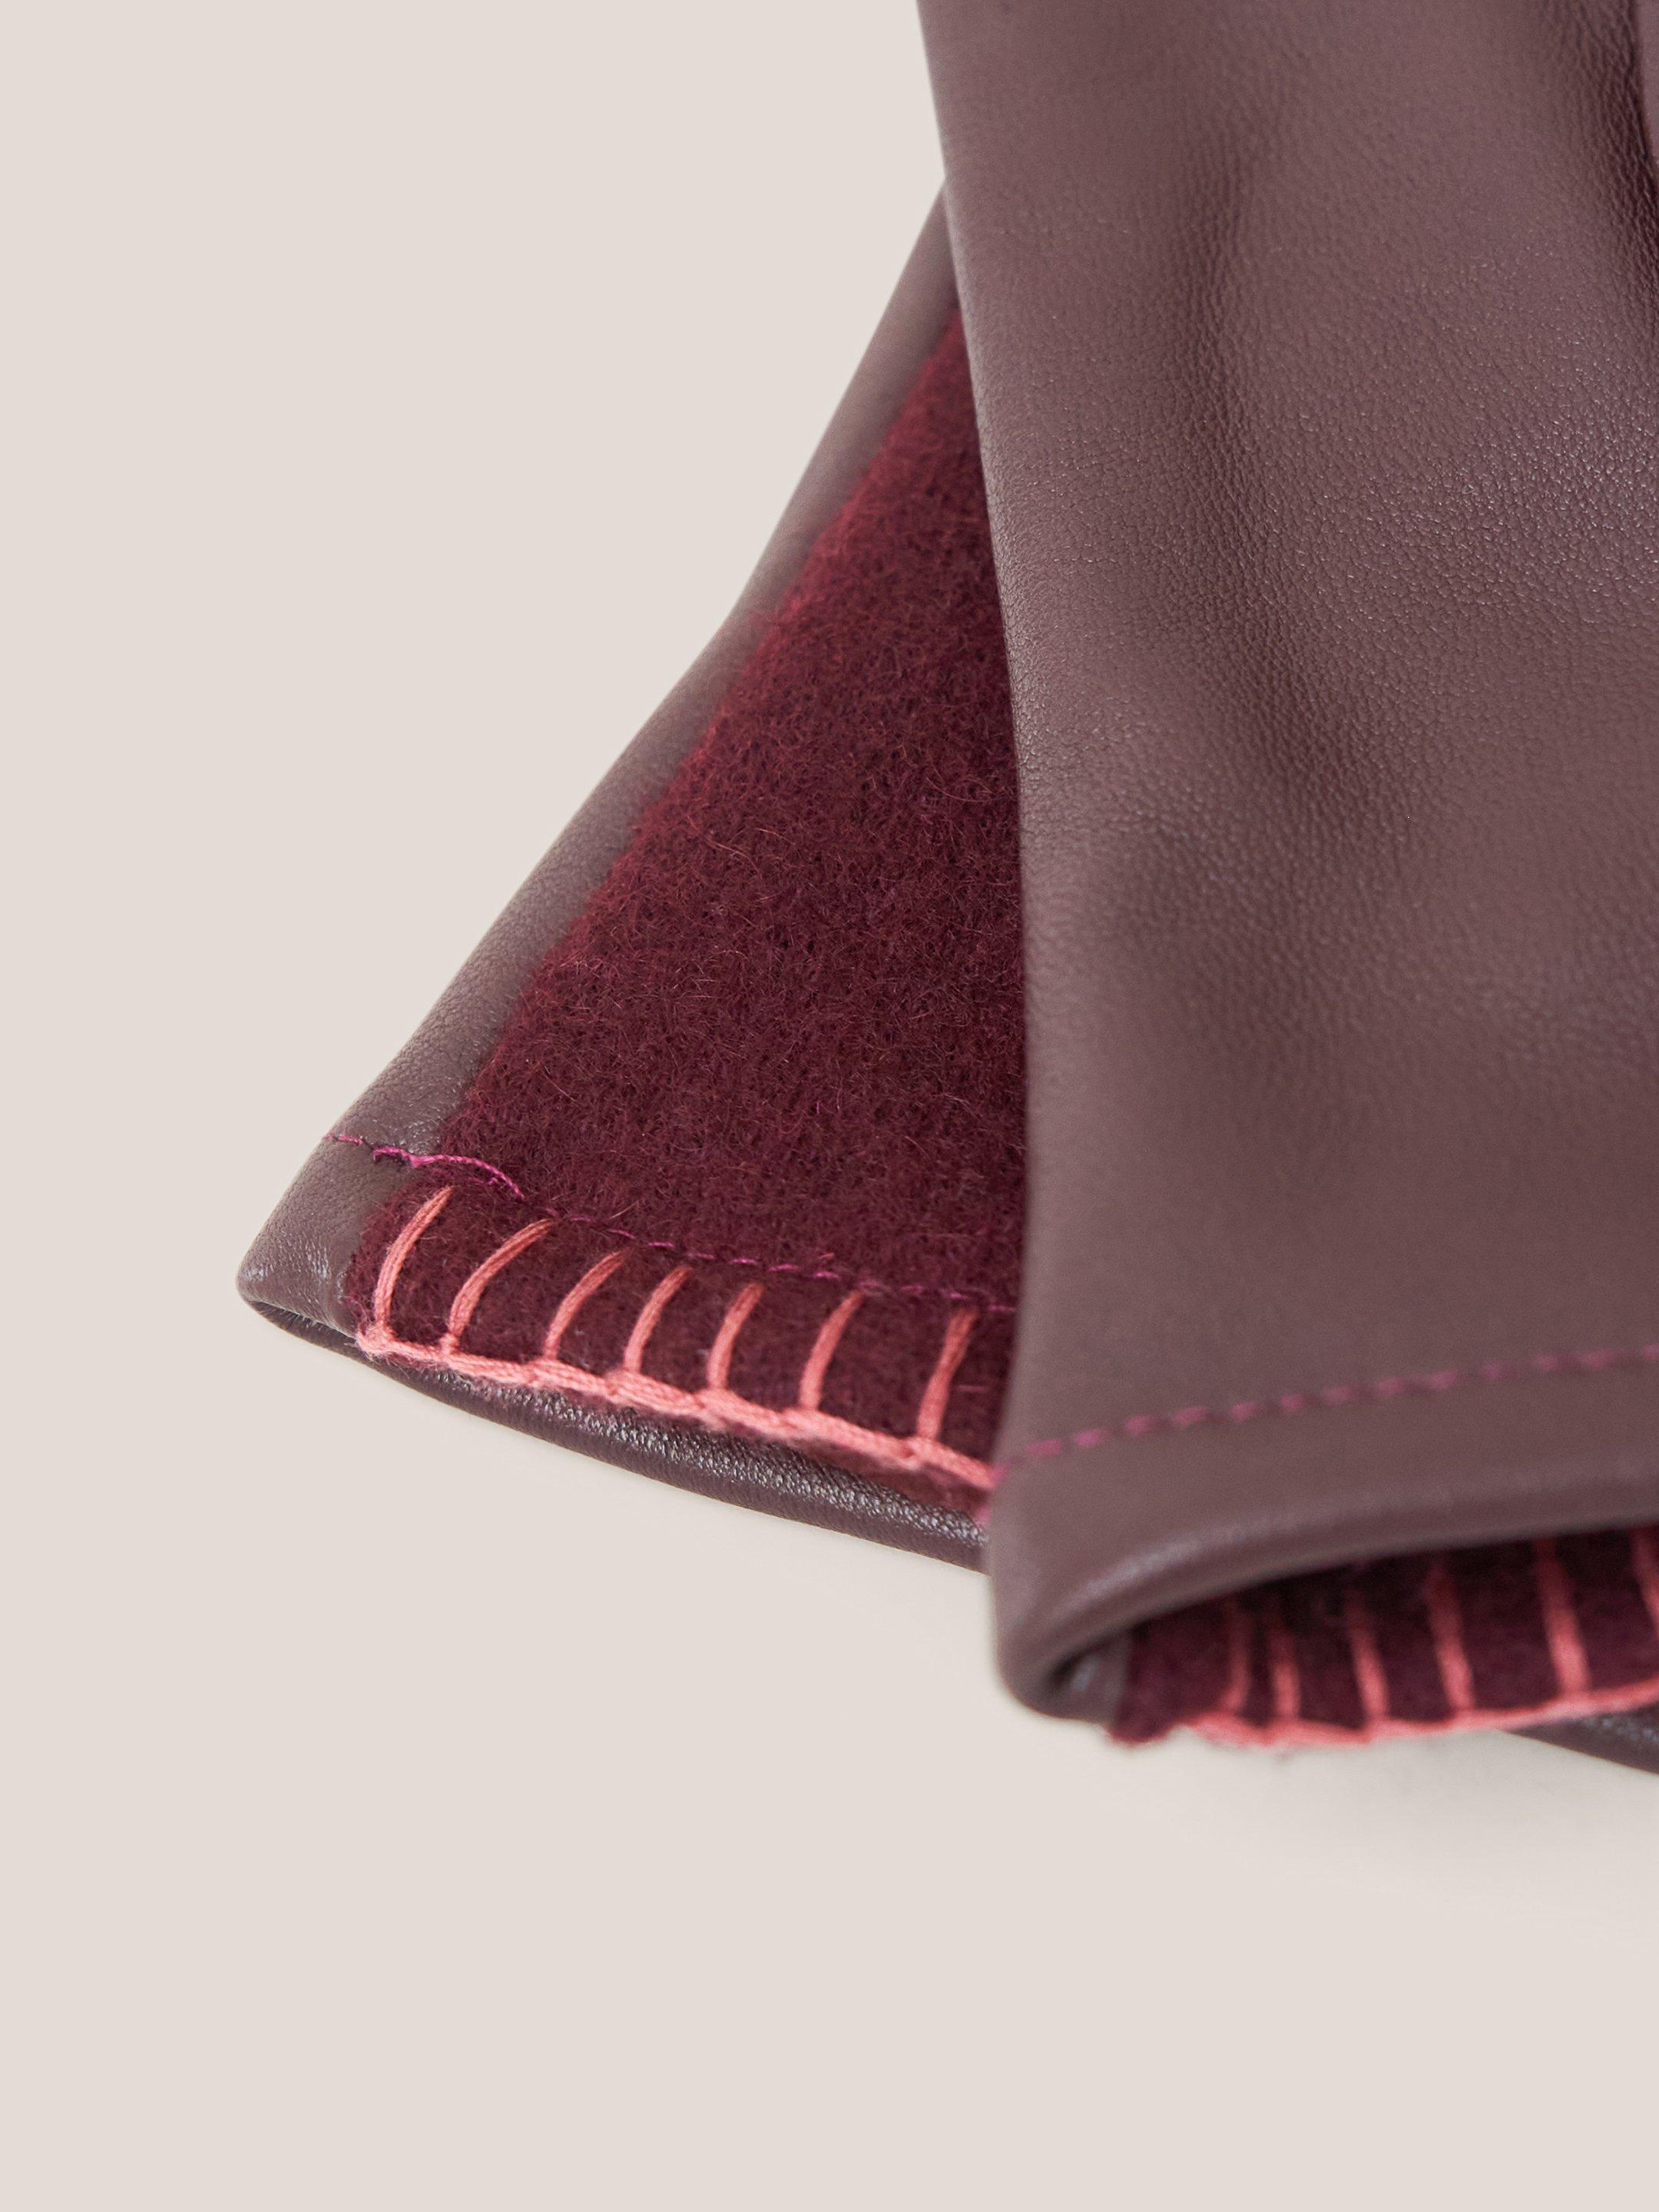 Lucie Leather Glove in PLUM MLT - FLAT DETAIL